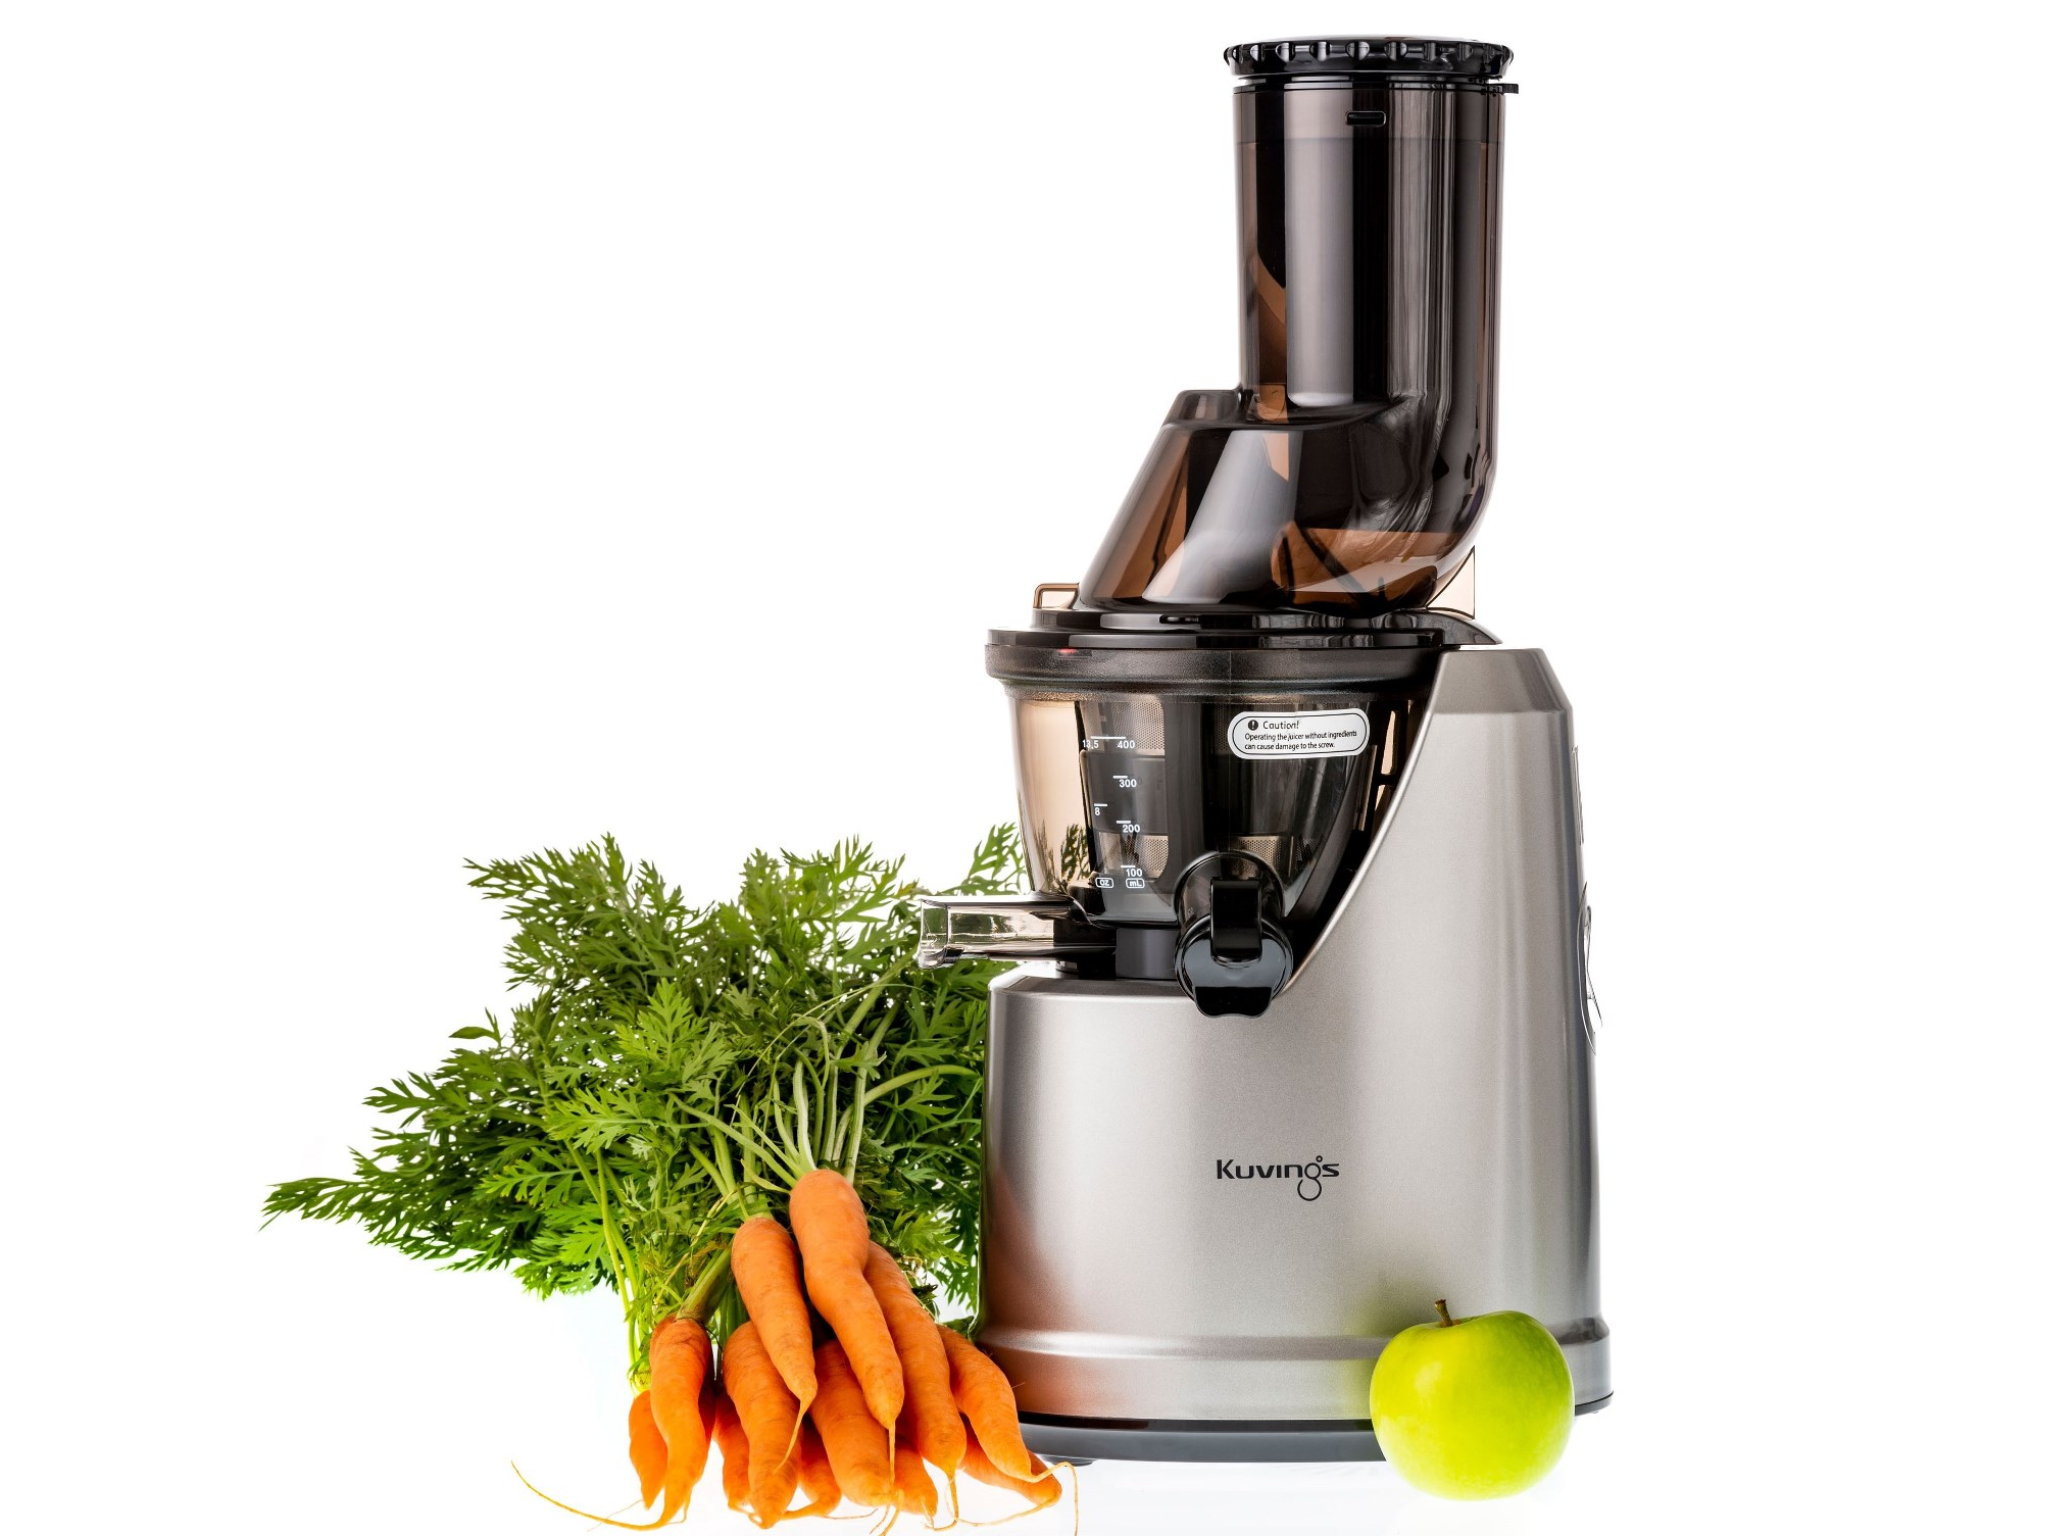 Kuvings-B1700-Juicer-in-Silver-indybest